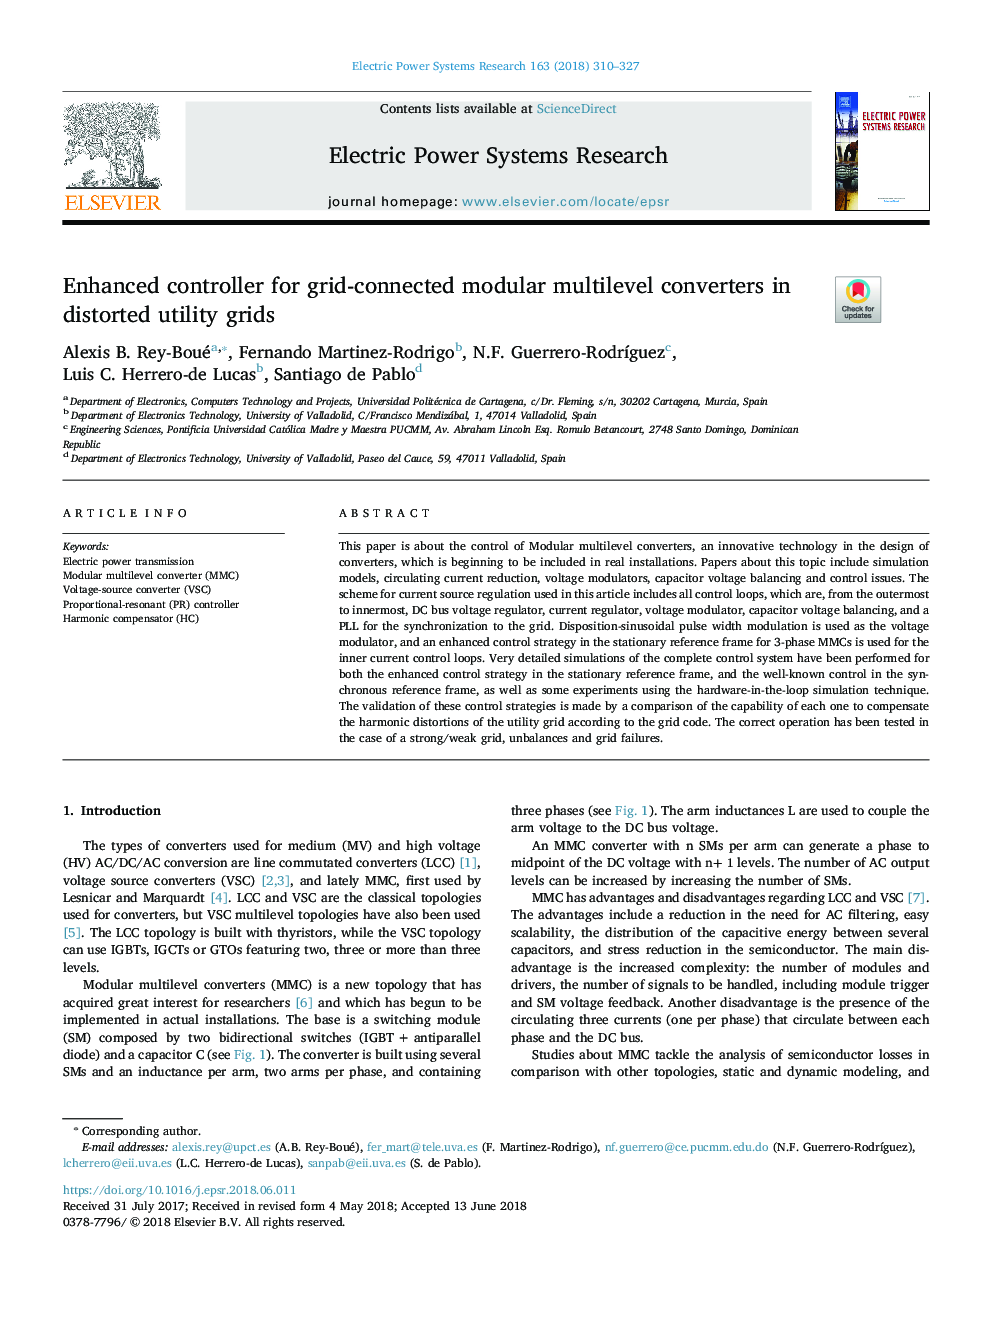 Enhanced controller for grid-connected modular multilevel converters in distorted utility grids